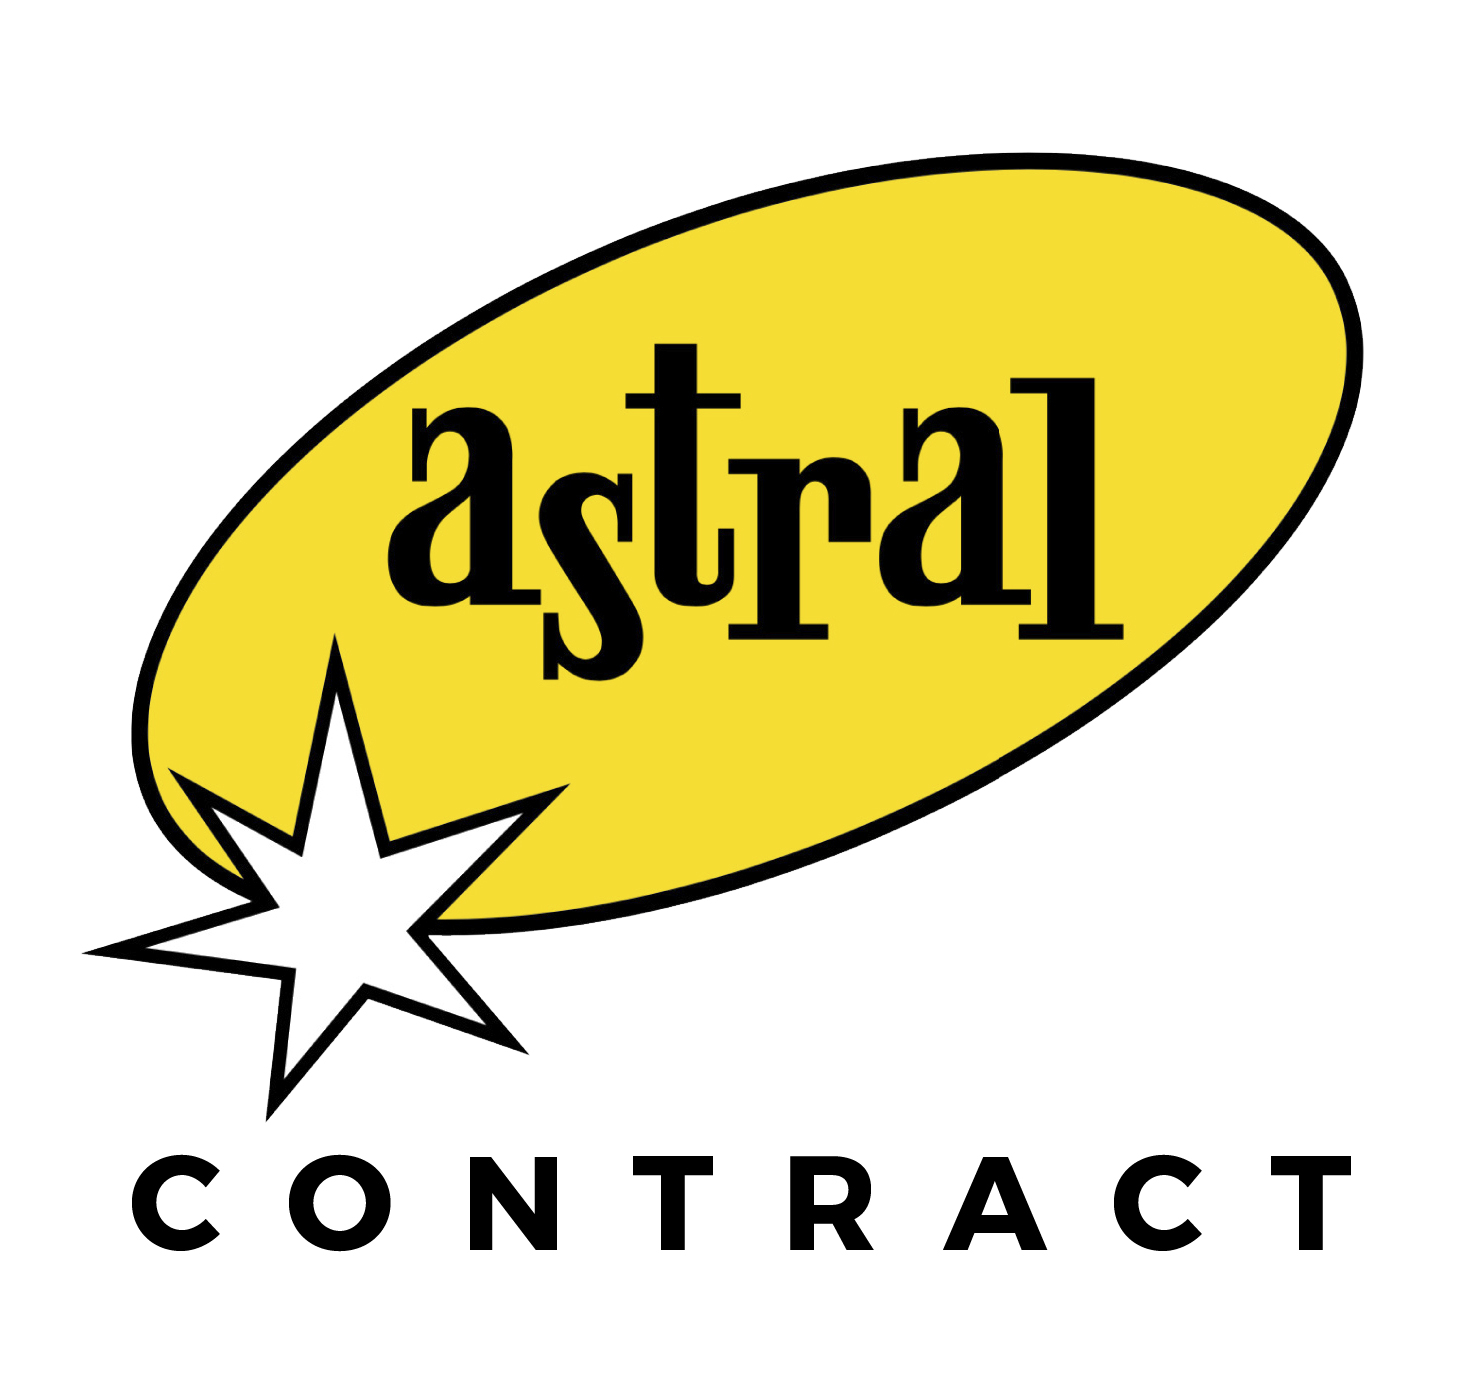 Astral Contract